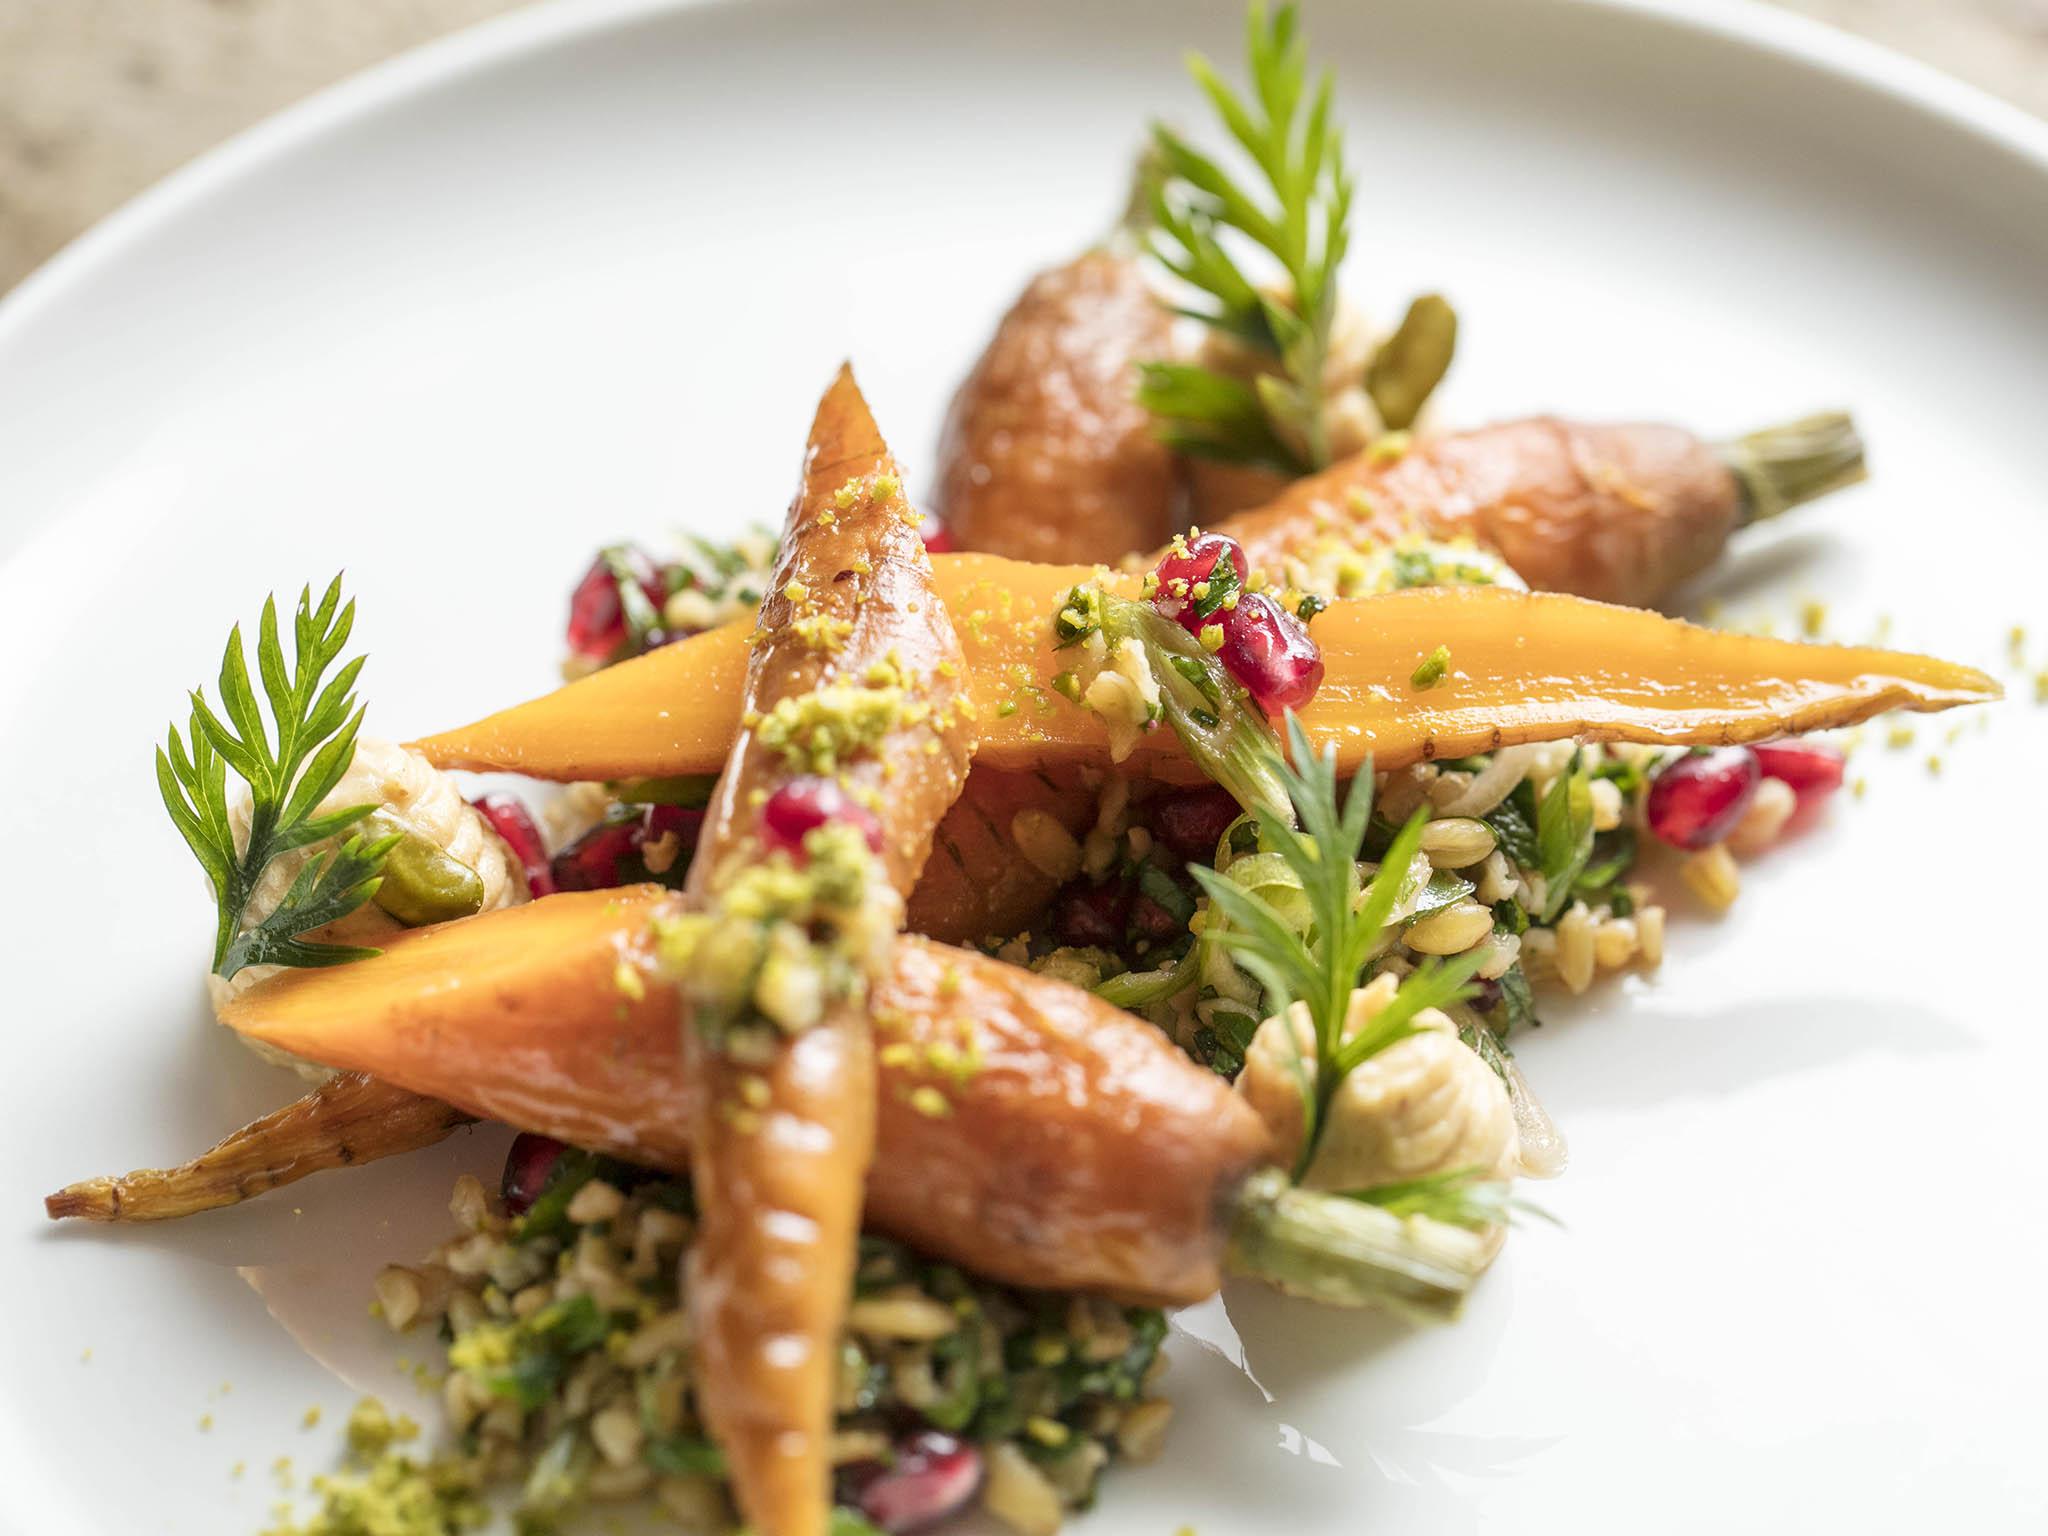 Roasted carrots, freekeh, pomegranate molasses, green onions, pistachios and sunflower seeds